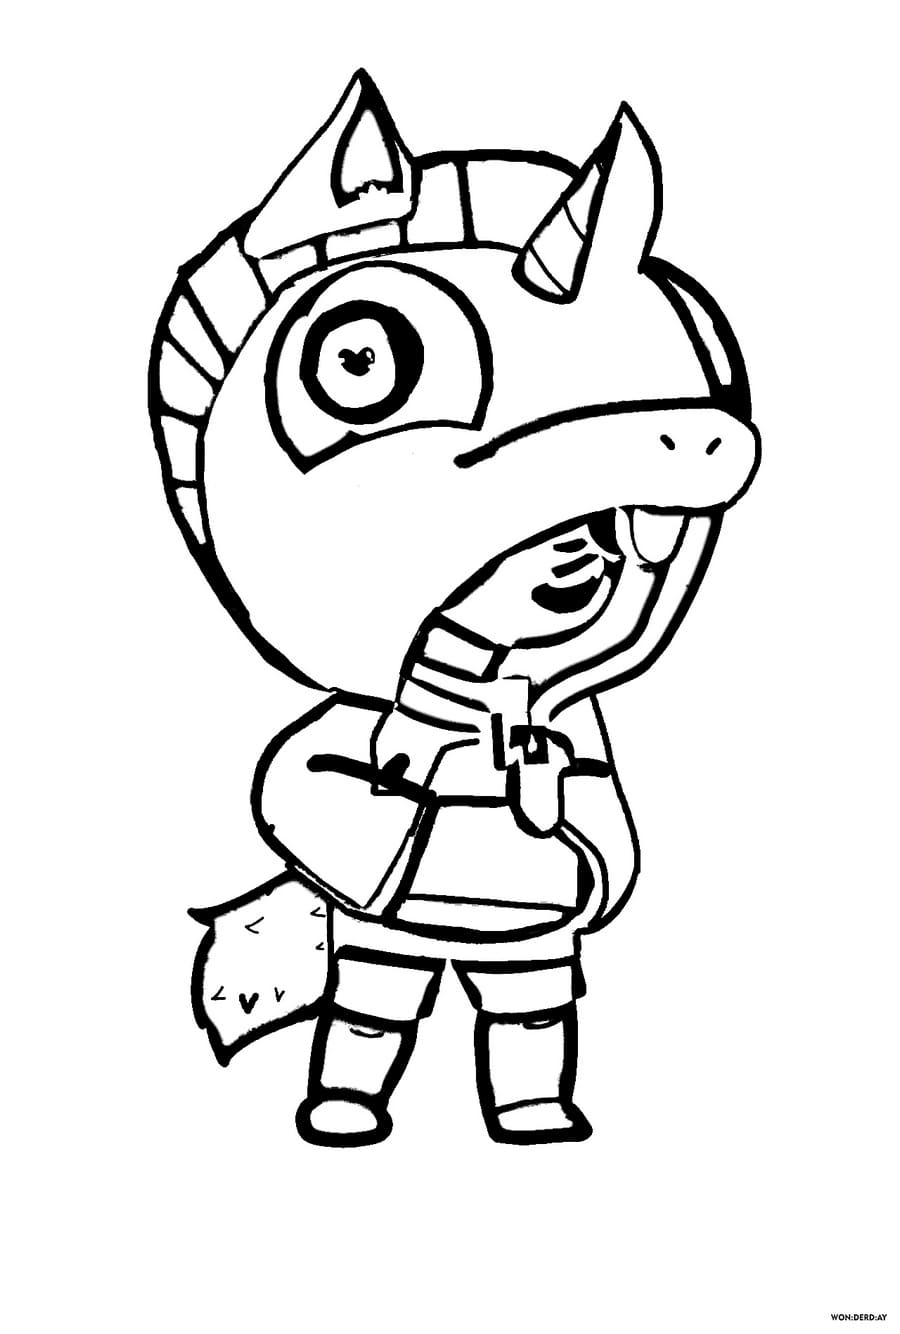 Leon Brawl Stars Coloring Pages Print For Free Wonder Day Coloring Pages For Children And Adults - coloriage brawl stars leon skin